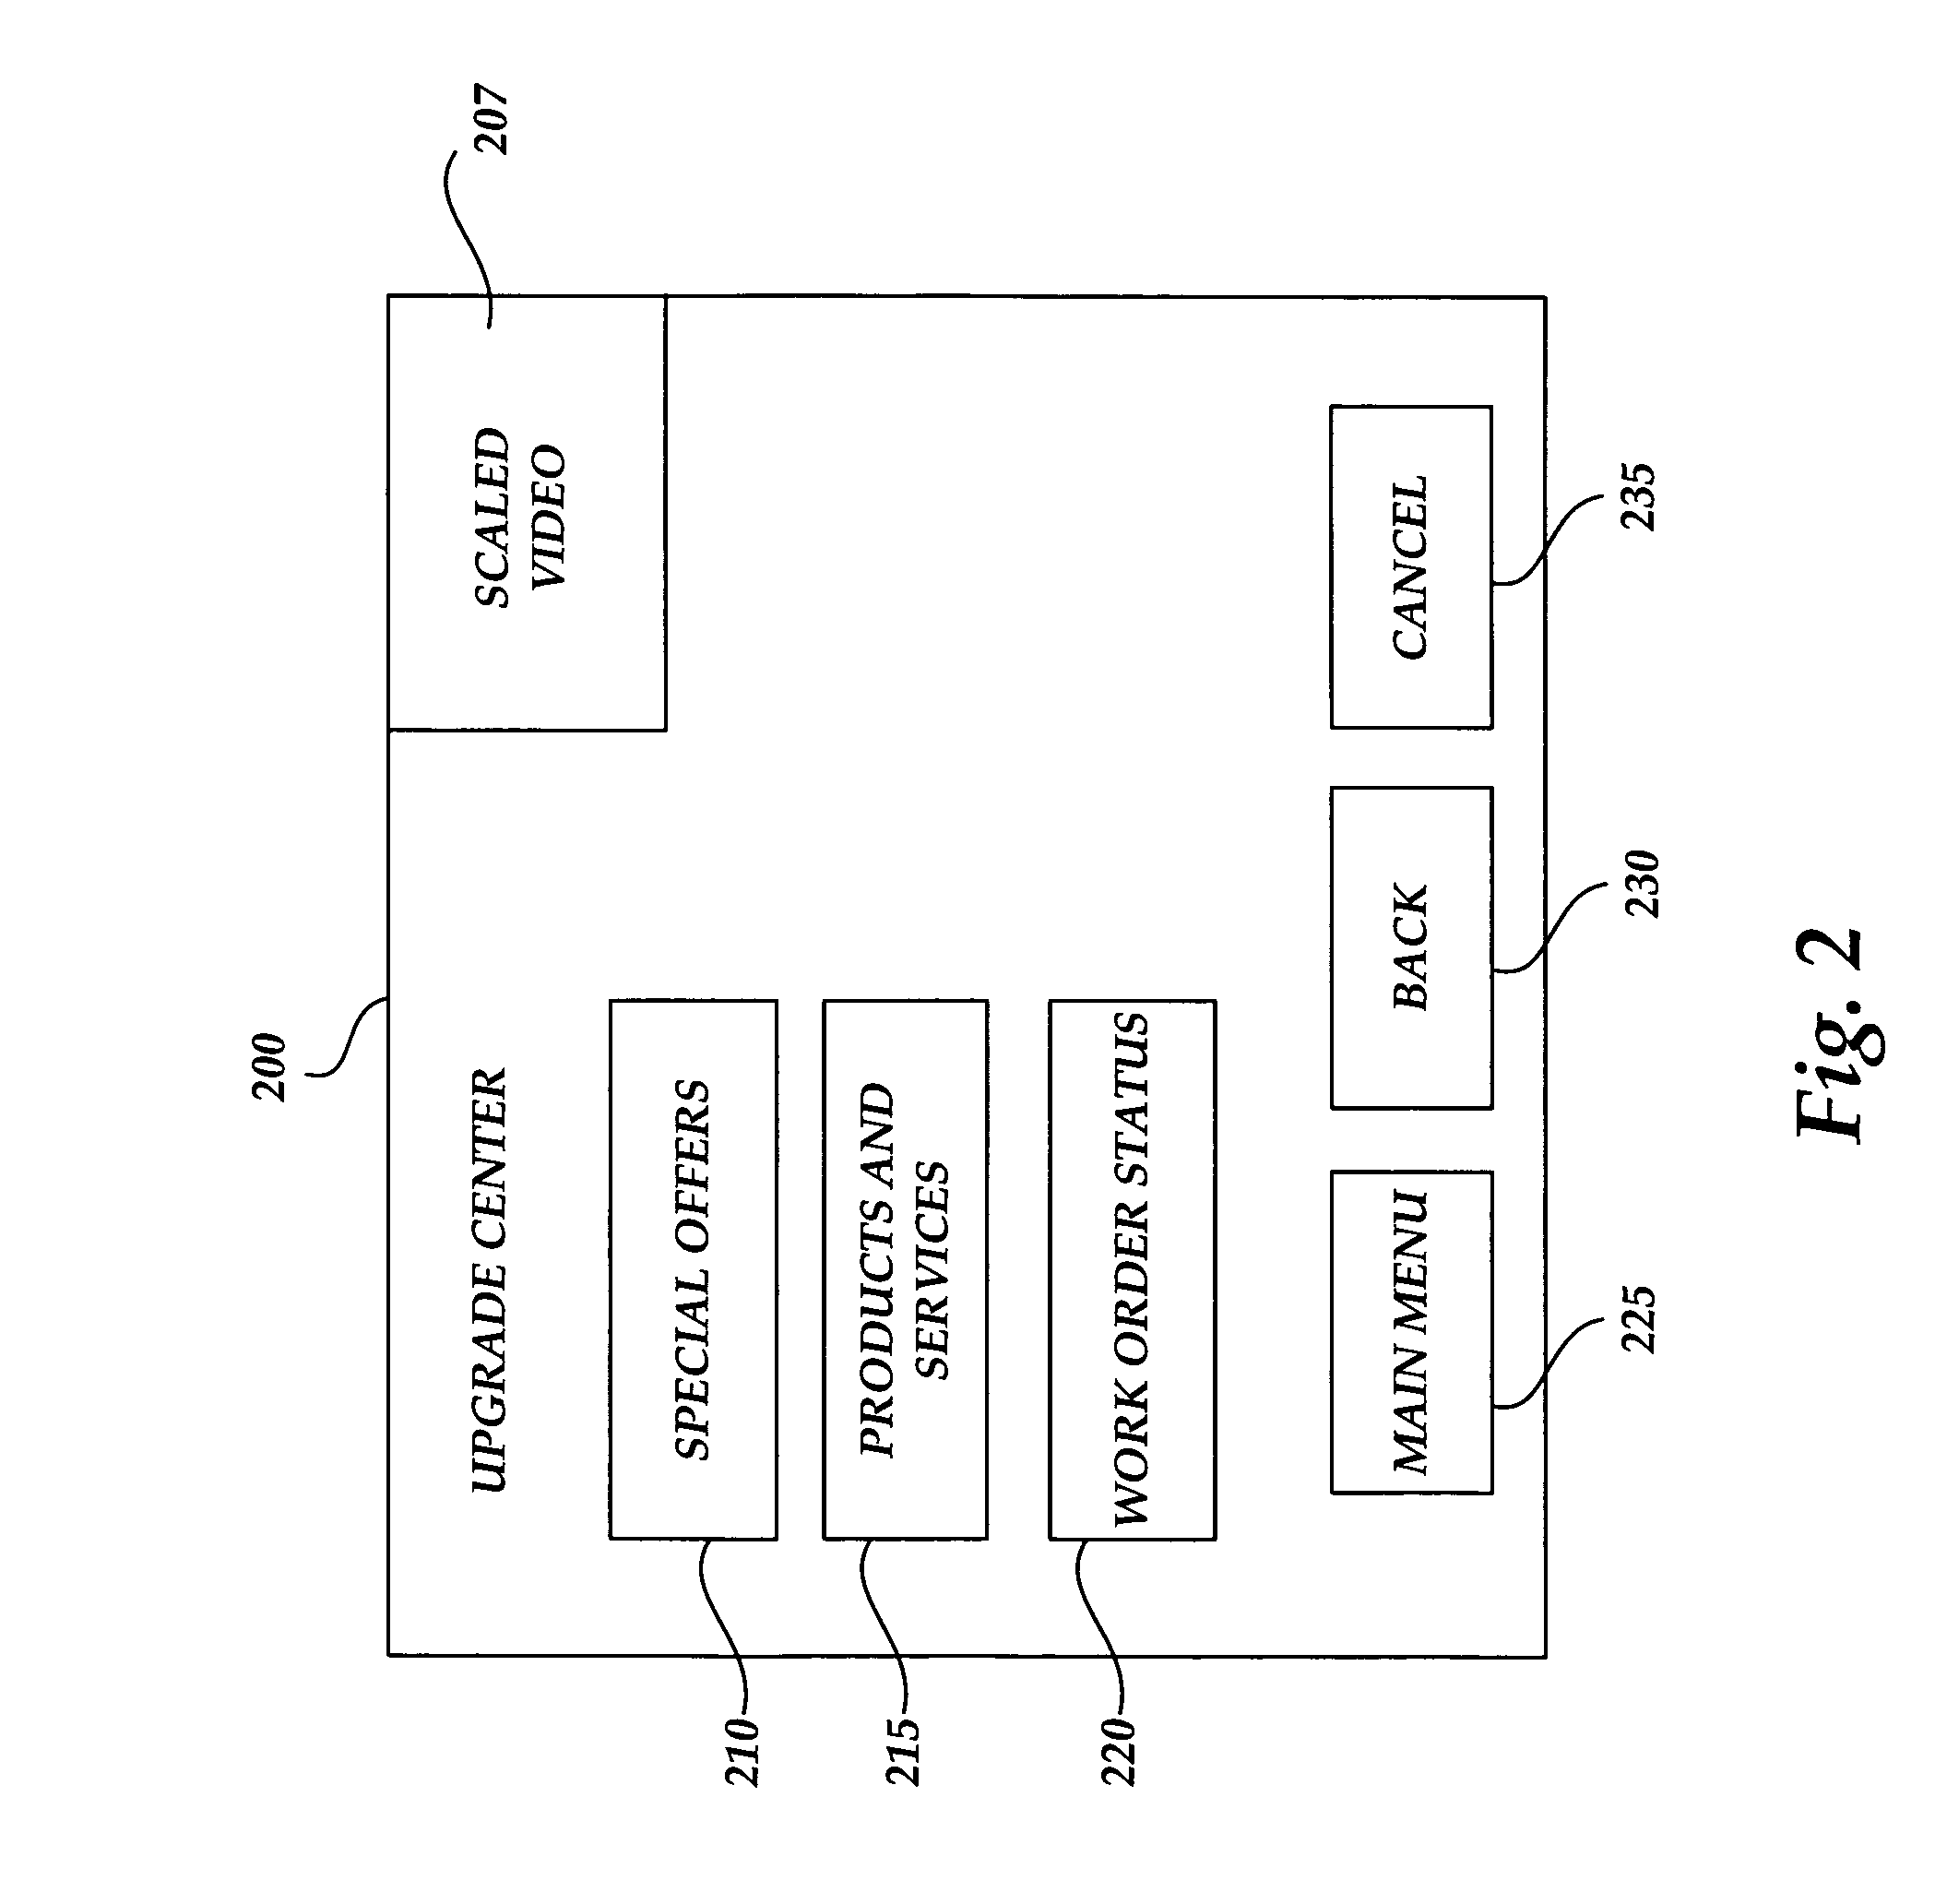 Methods and systems for providing product and services upgrades and work order status in a cable services network